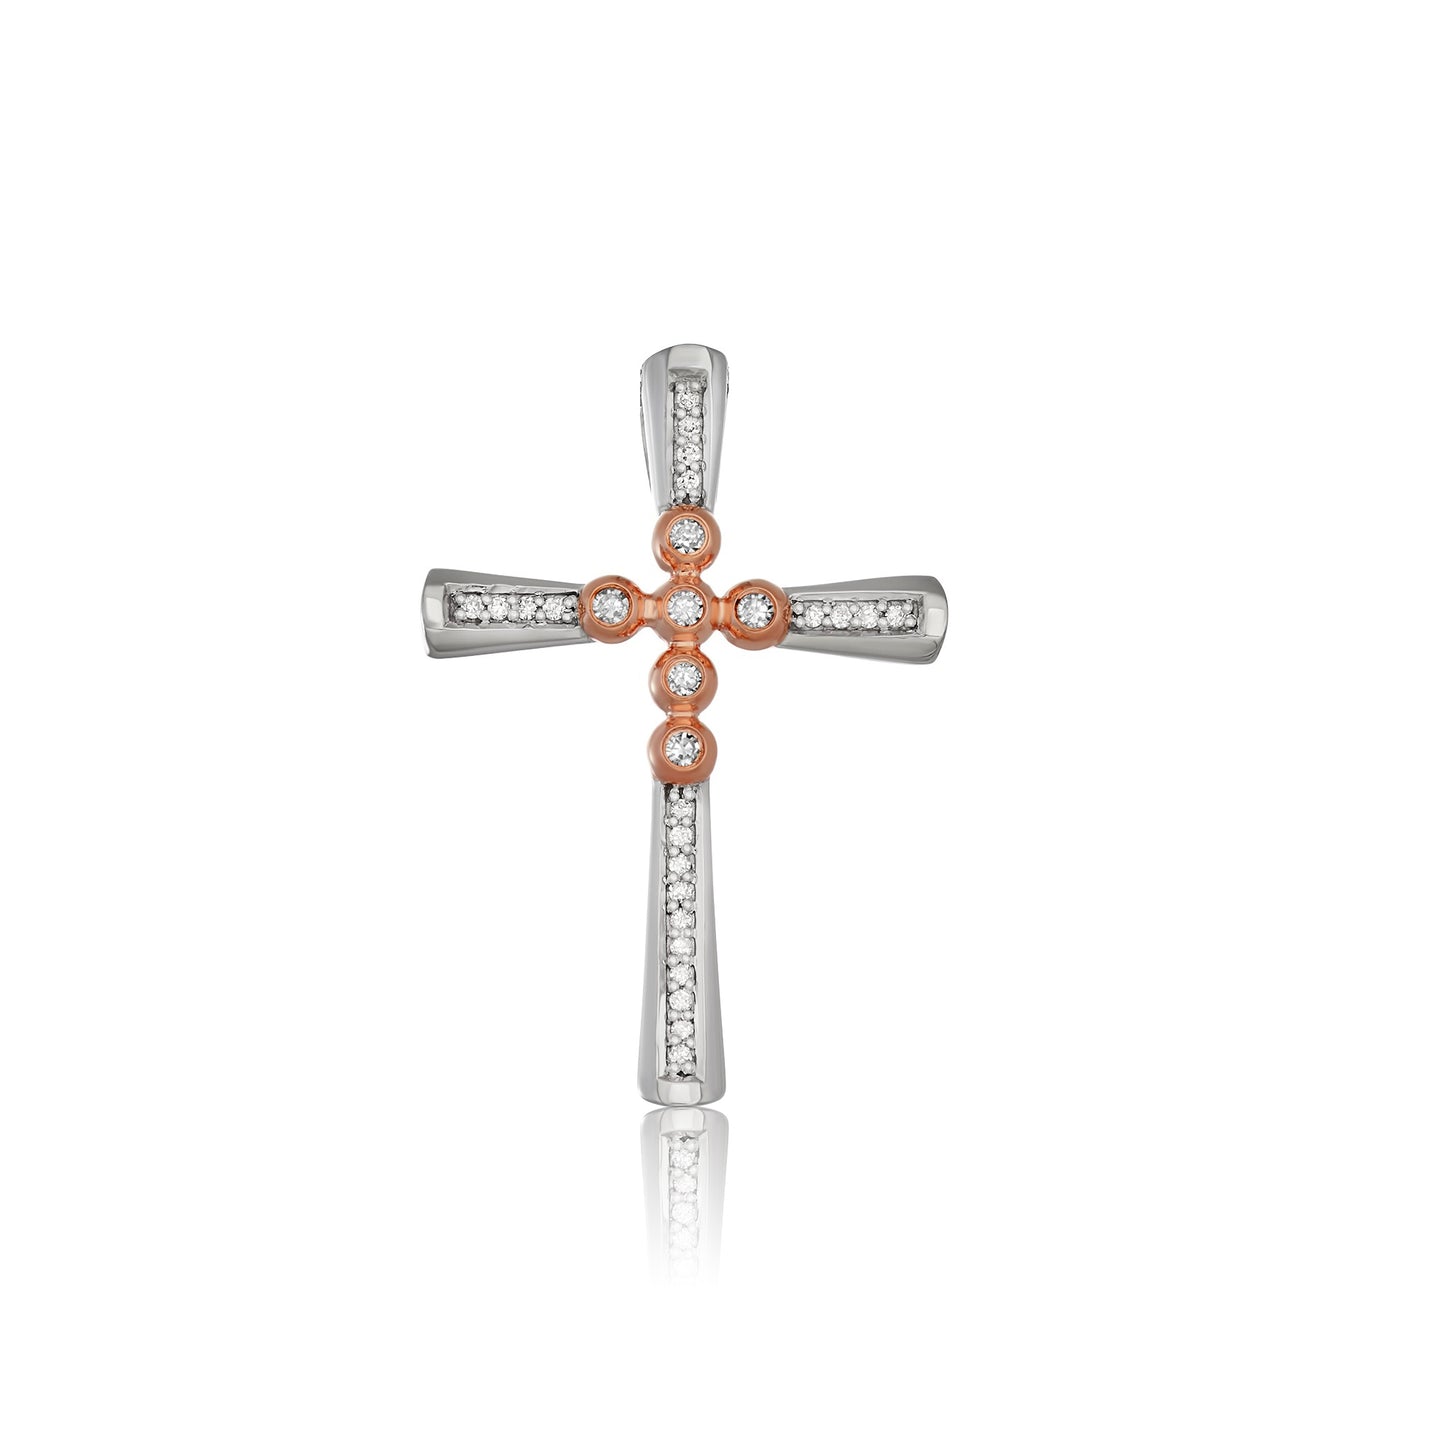 10k White and Rose Gold 0.16 ct TDW White Diamond Cross Necklace